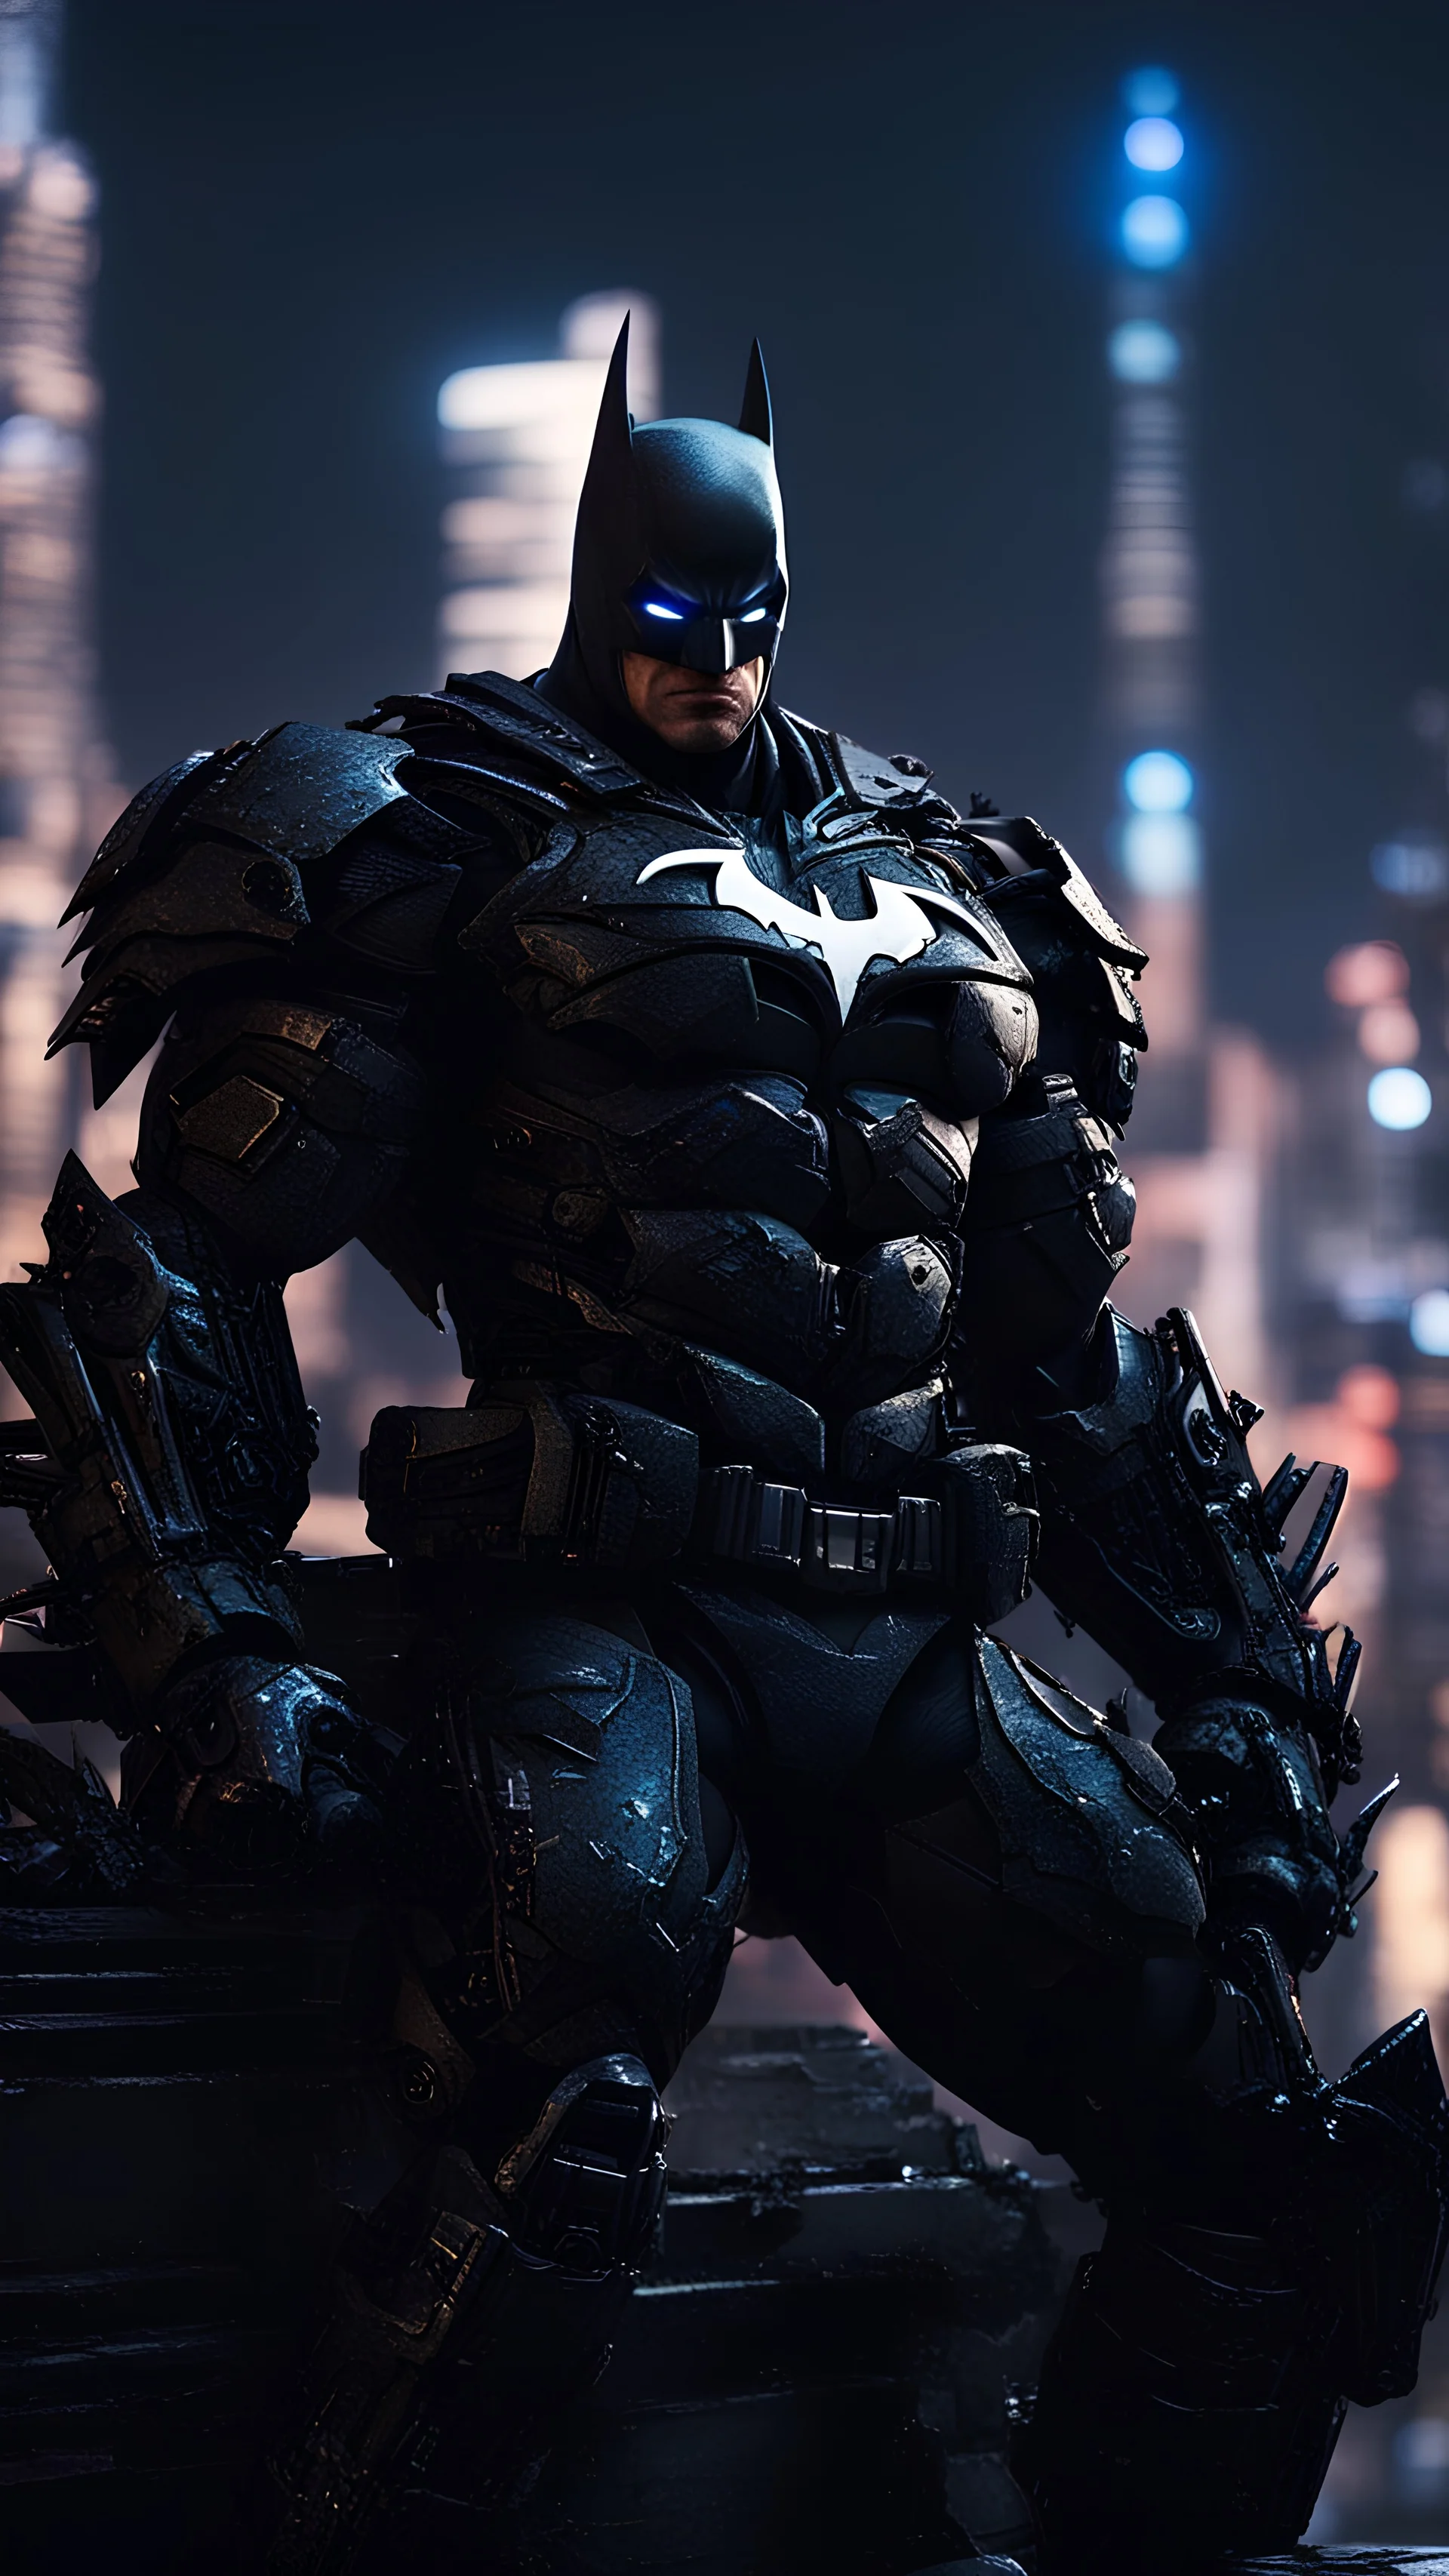 Batman wearing venom armor, face visible, sharp face focus, ready for batt, destroyed city in the background, deep perspective. bokeh, rim lights, light leaks, neon ambiance, abstract black oil, gear mecha, detailed acrylic, grunge, intricate complexity, rendered in unreal engine, photorealistic